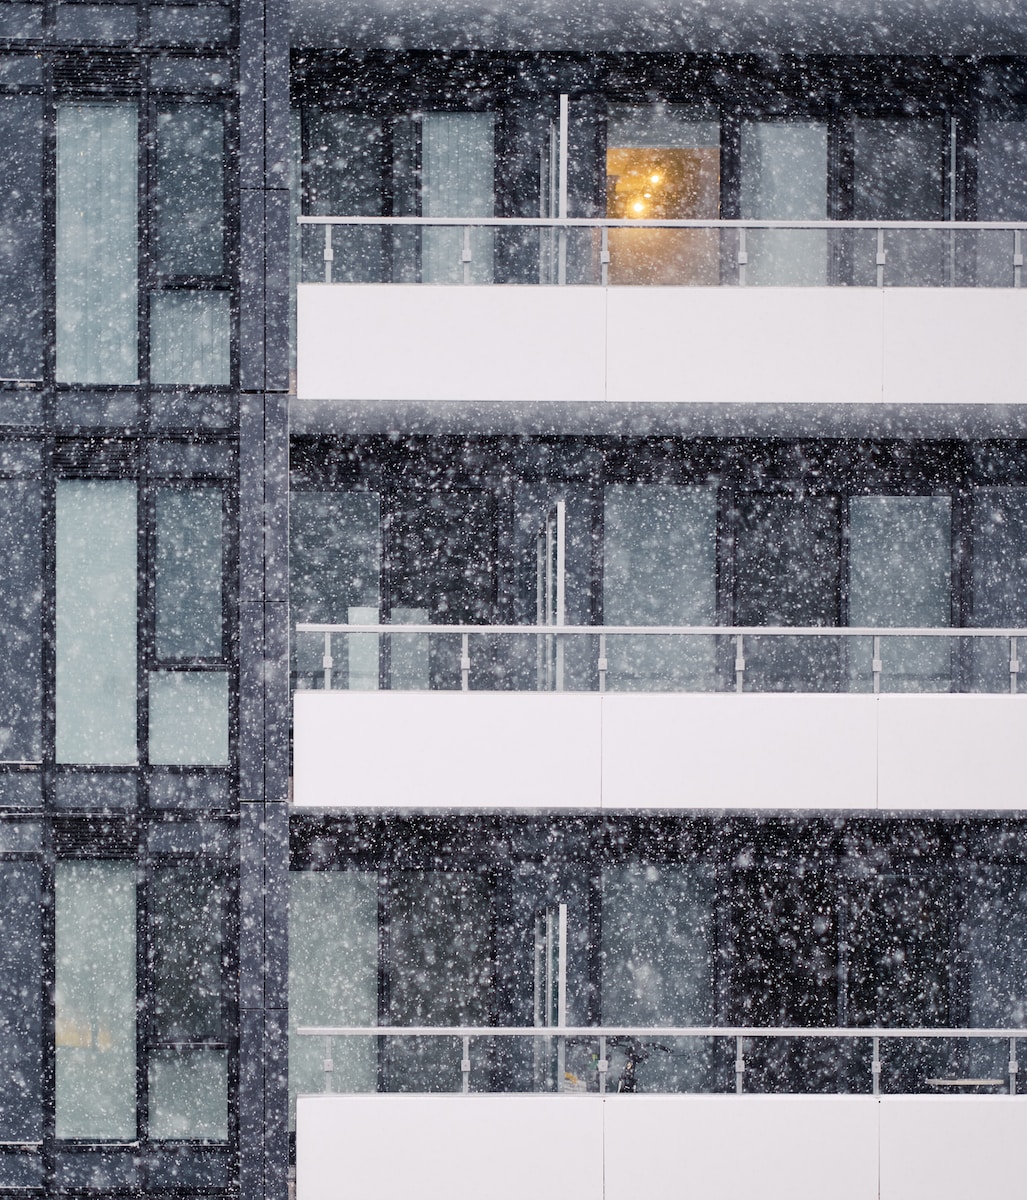 a tall building with windows covered in snow